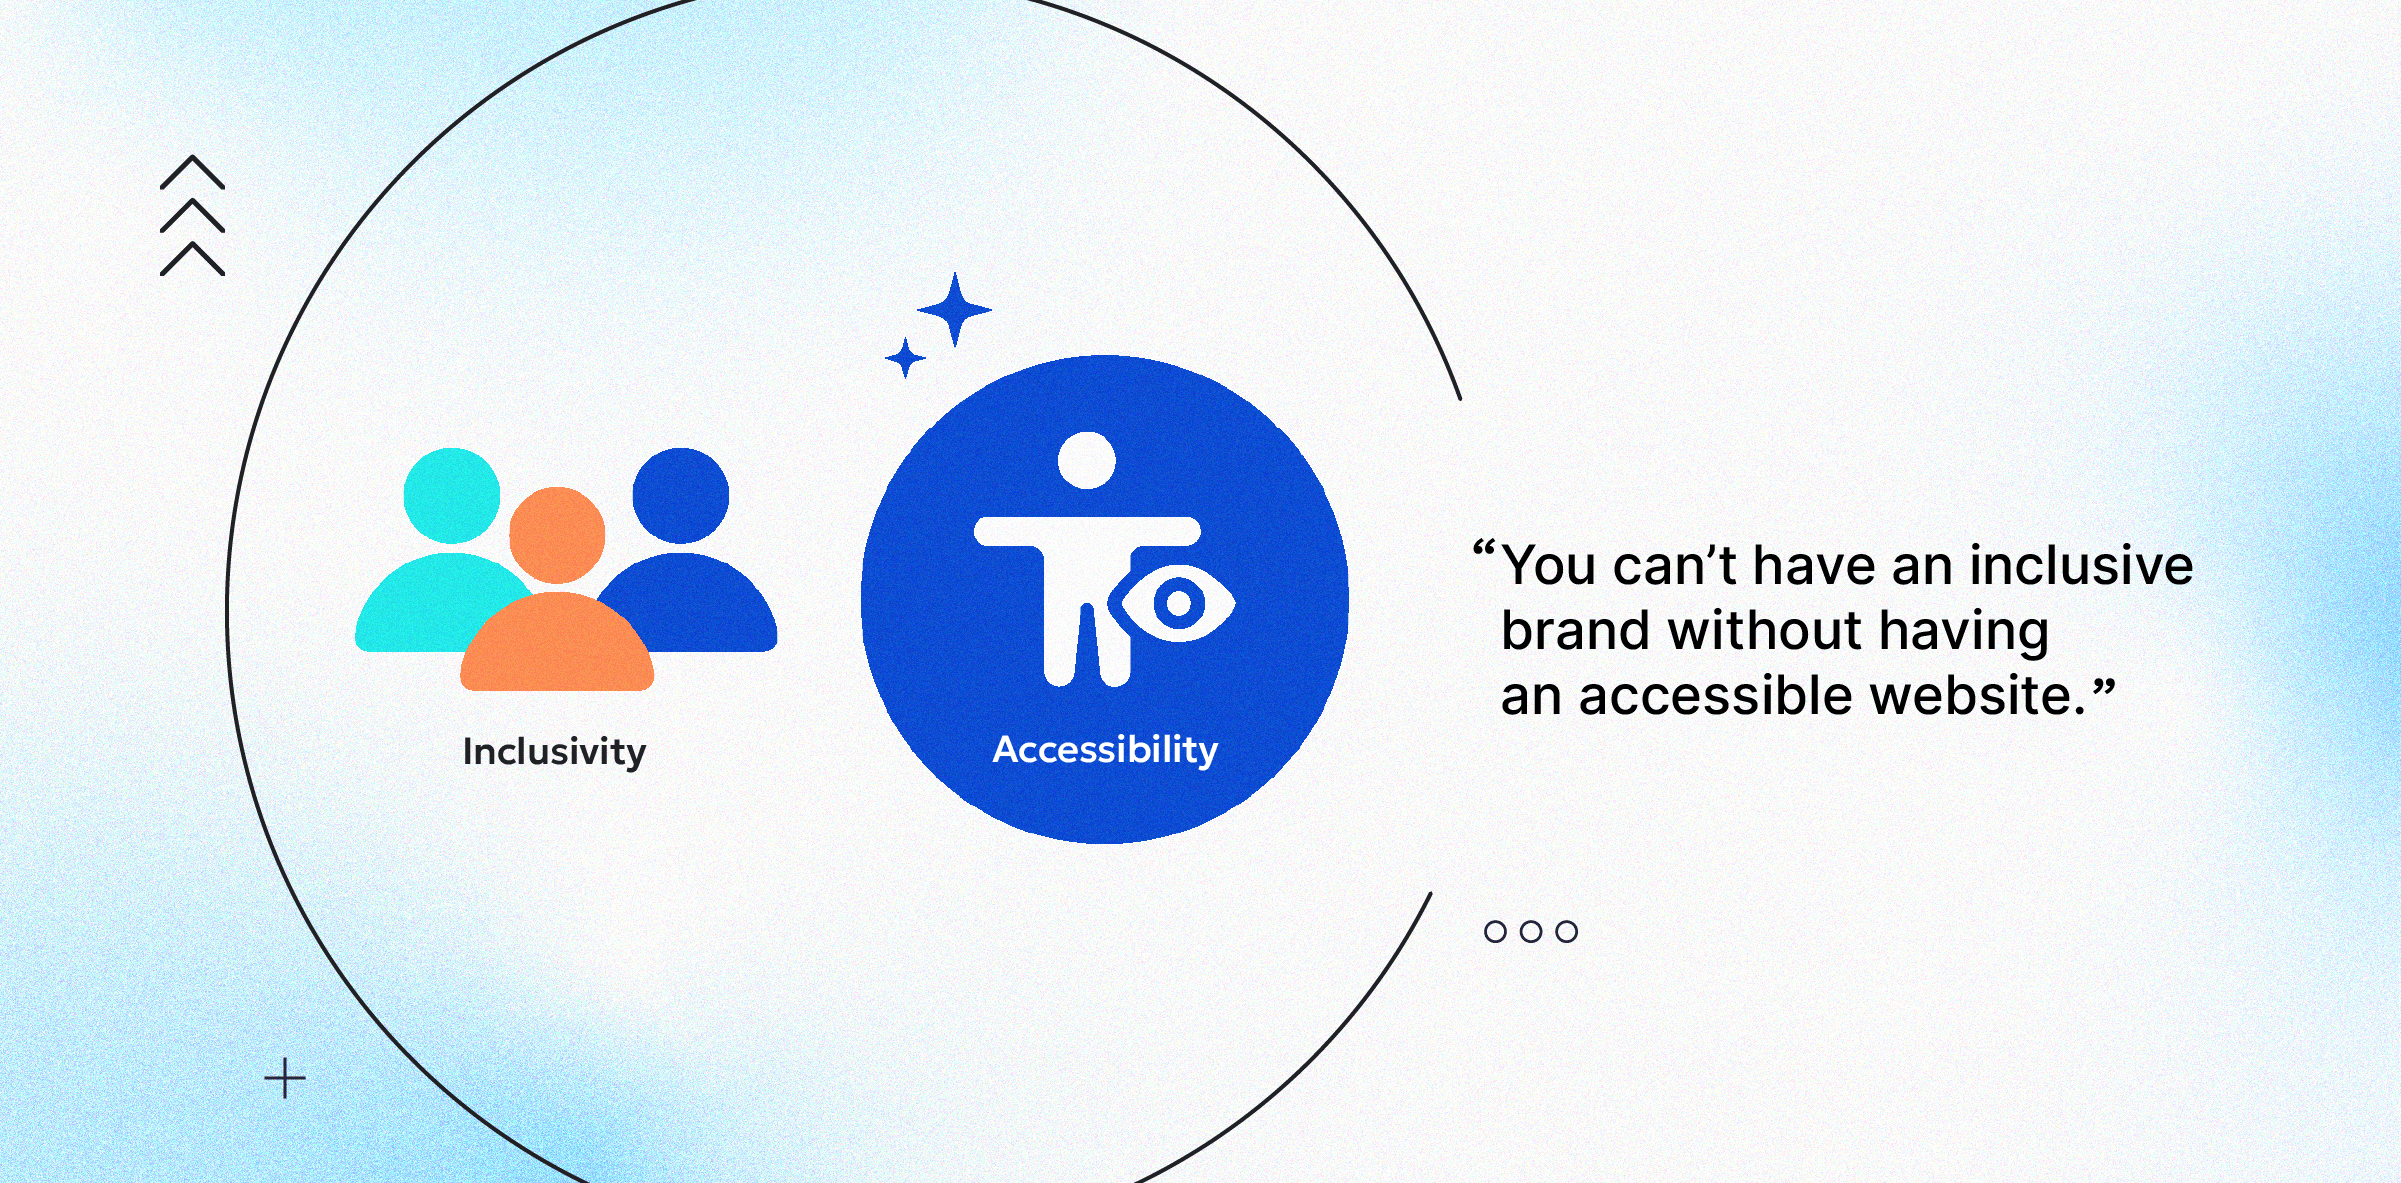 On the left are three people icons, one teal, one orange, one blue, with a text label "inclusivity" under them. On the right of that is a blue circle with a person icon and an eye with the text label "accessibility" under it. A circle encompasses all of this but is open on the right side where a quote reads: "You can't have an inclusive brand without having an accessible website".